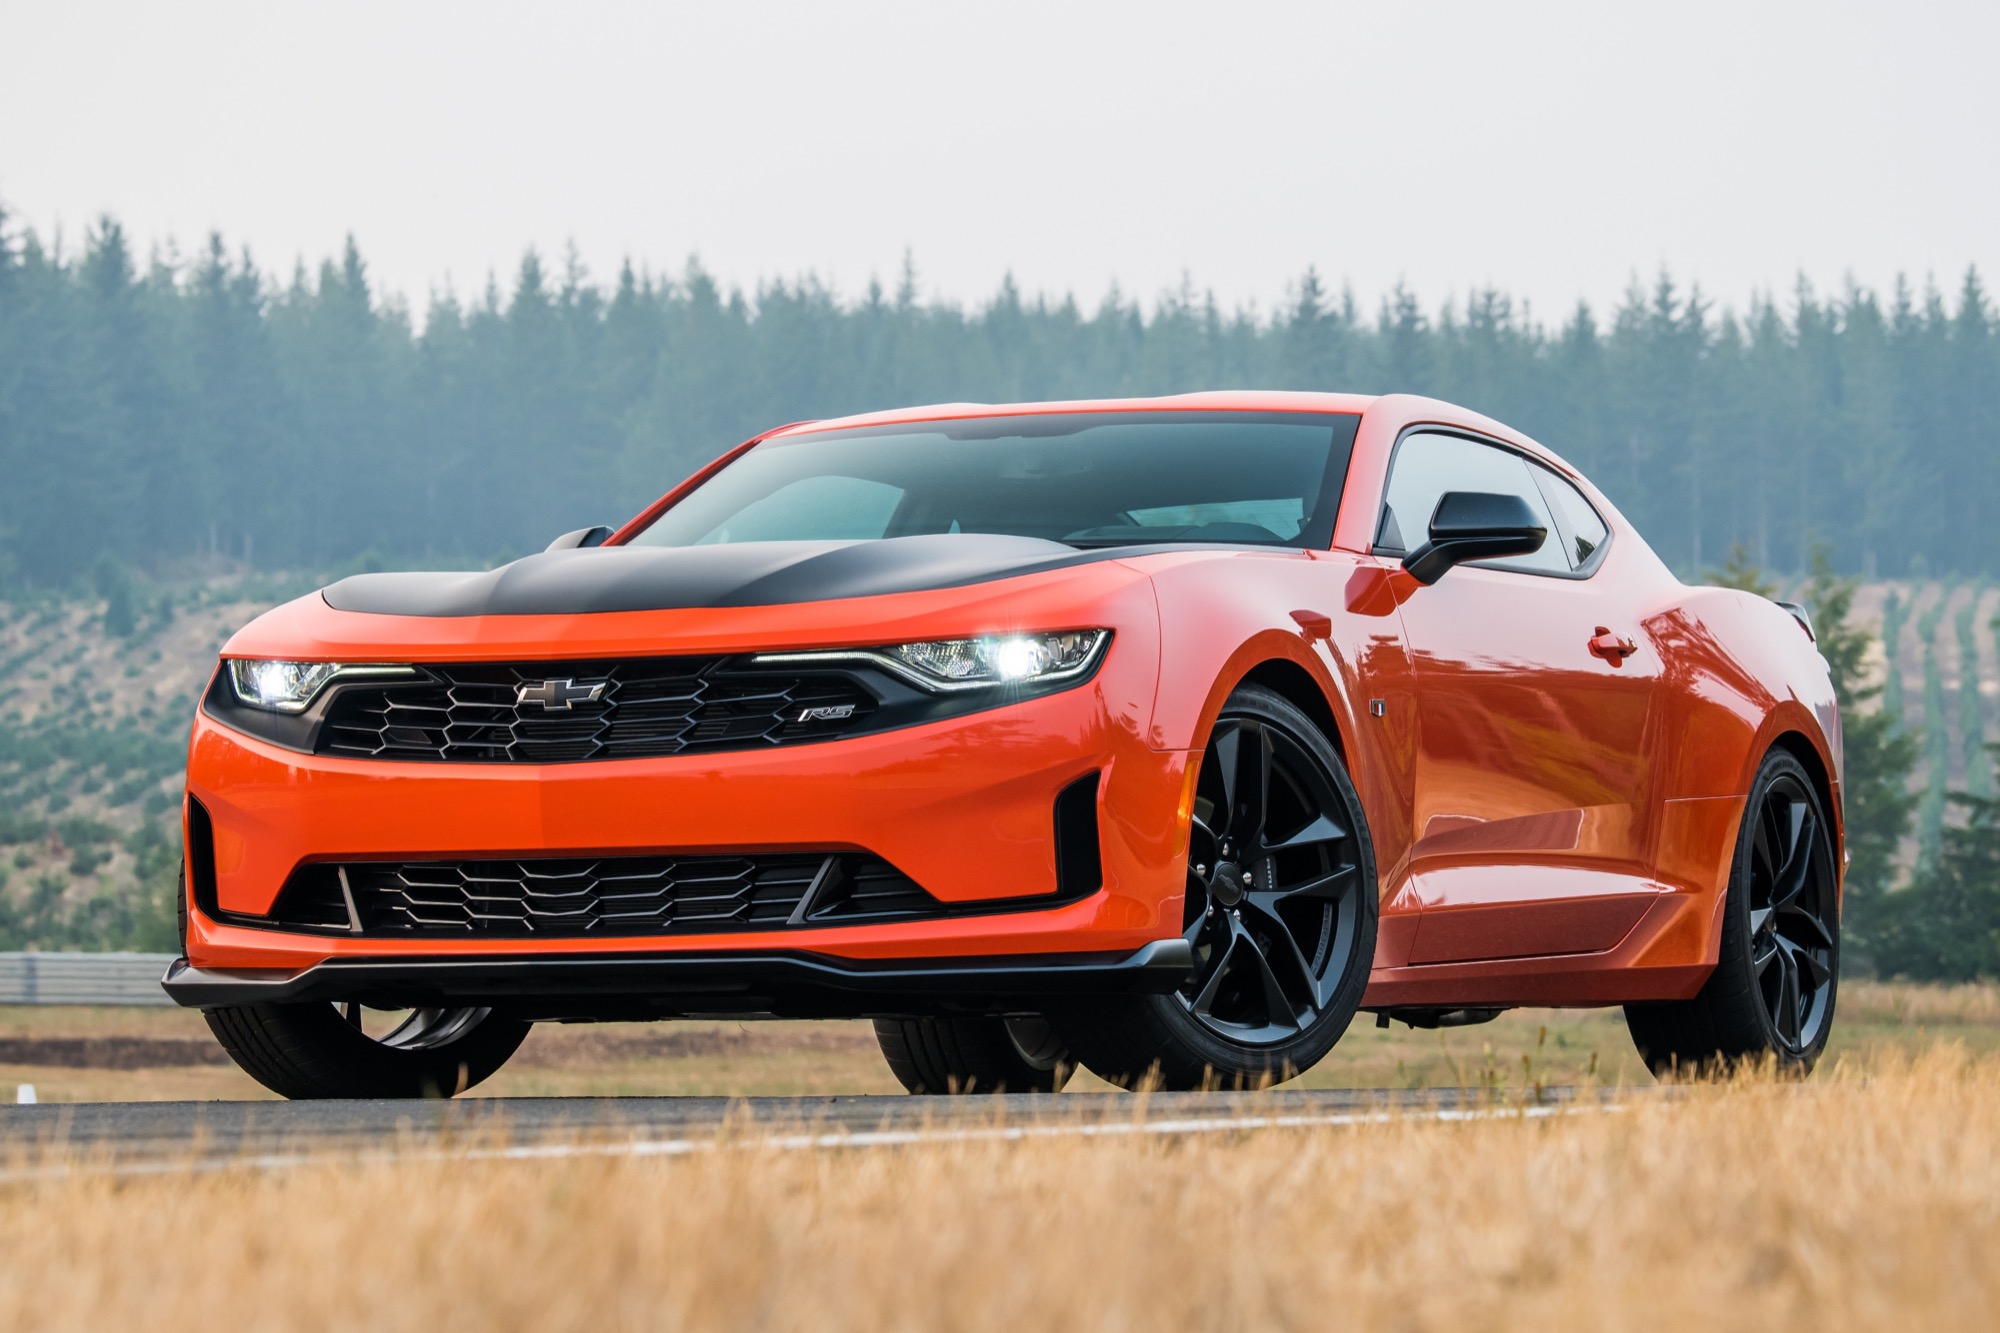 What's Really Going On With The Future Chevrolet Camaro GM Authority